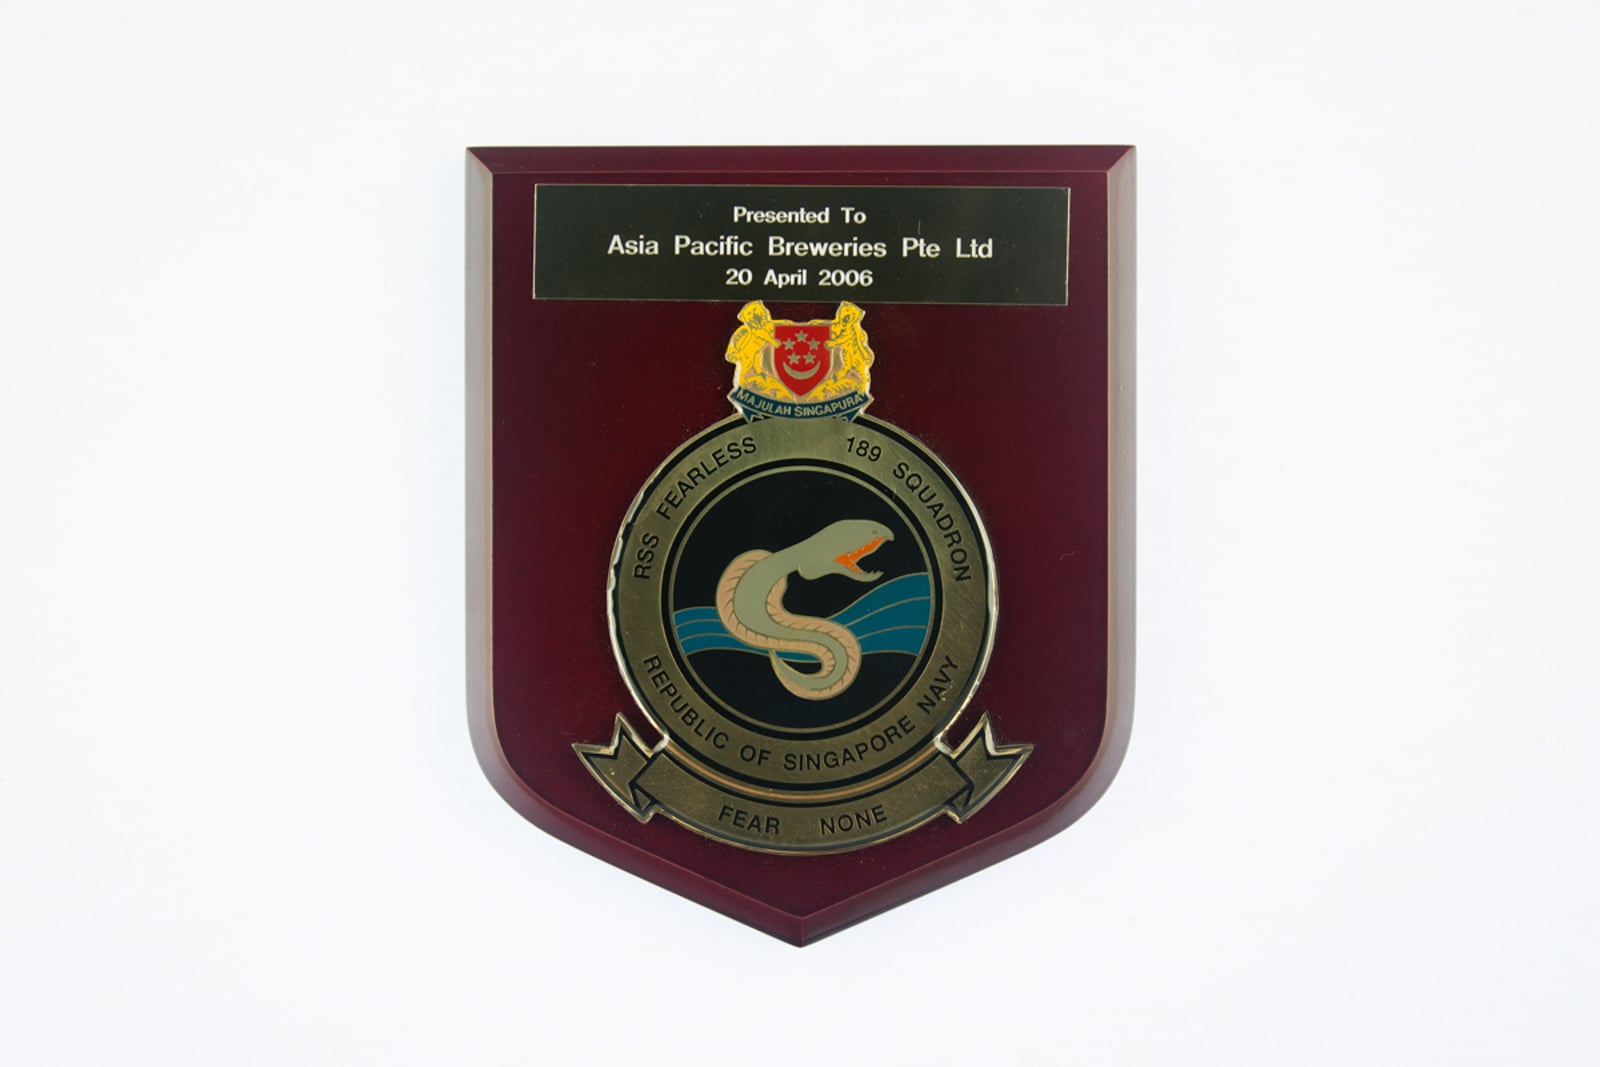 RSS Fearless, 189 Squadron Plaque 2006